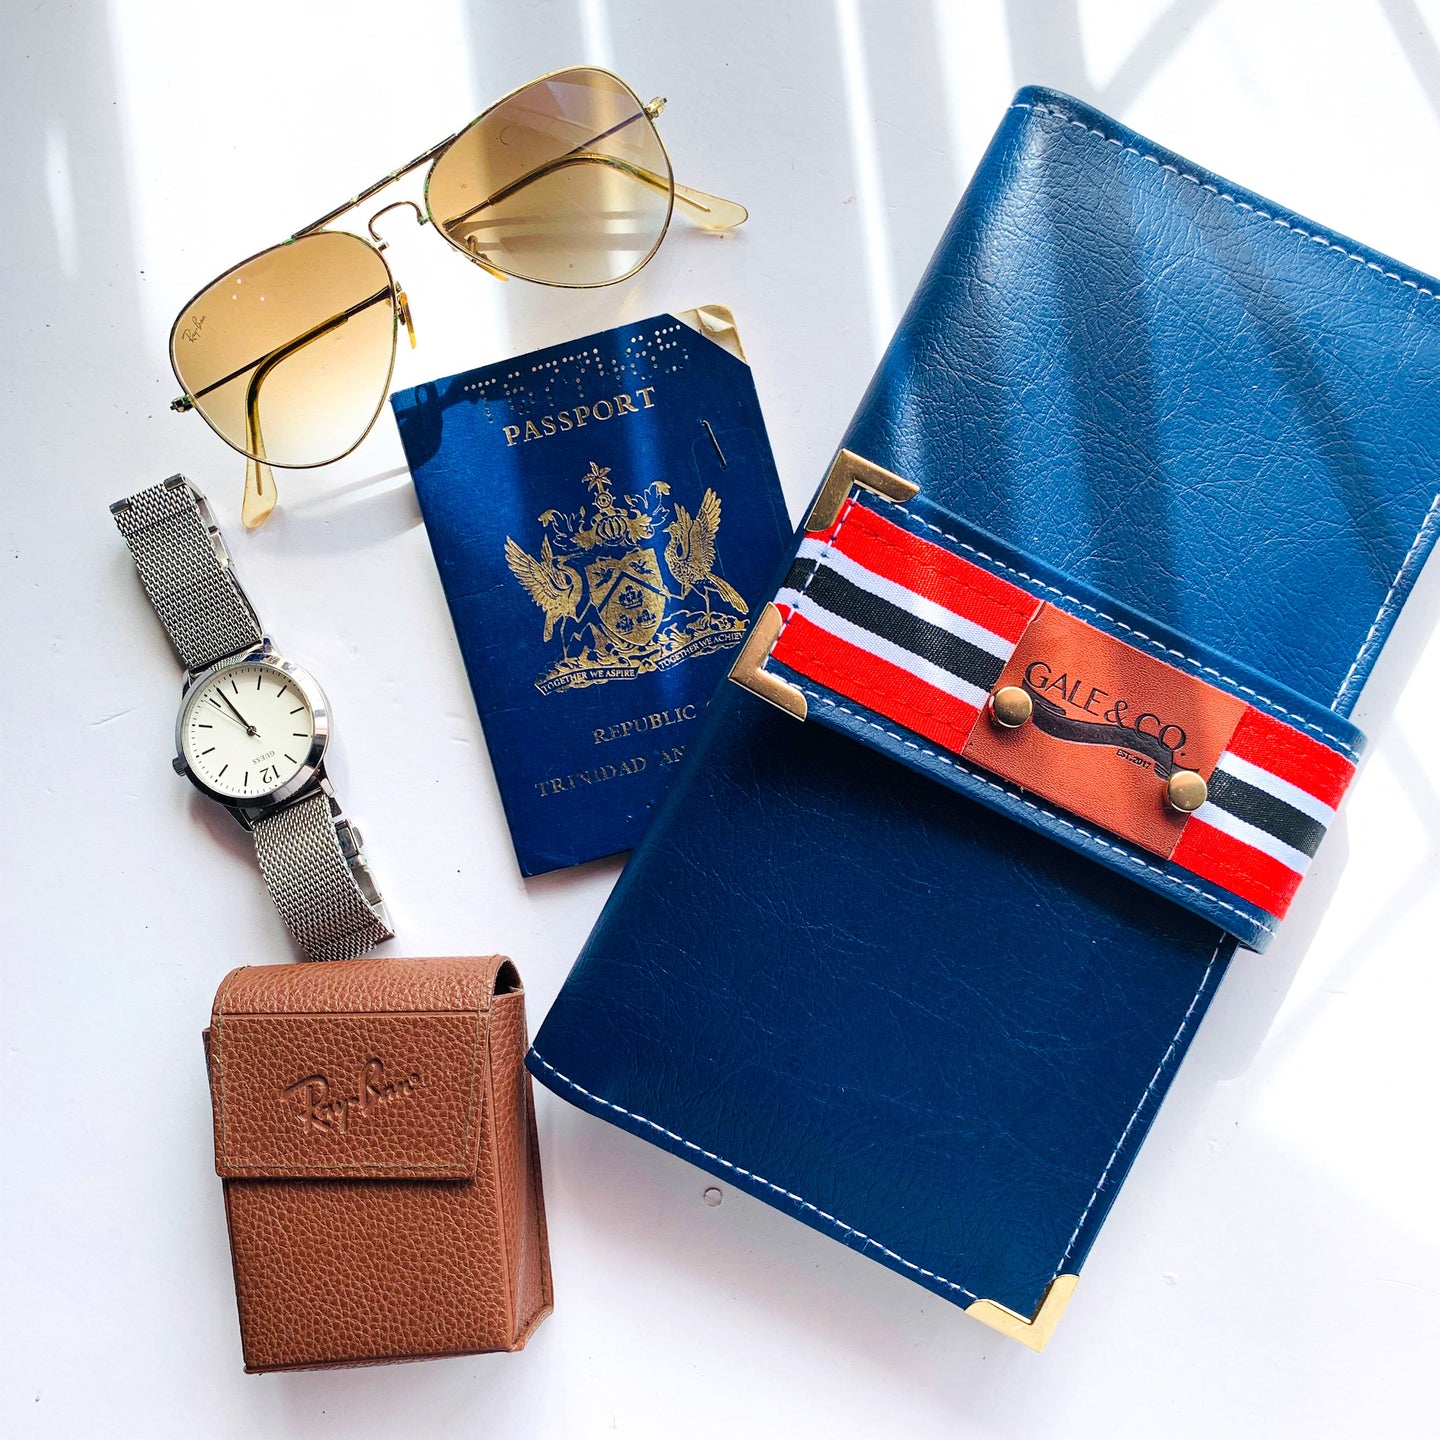 blue passport cover, passport holder men's passport cover, gale and co trinidad, made in trinidad and tobago, luxury stationery, office supplies, planner accessories, vegan leather brand, faux leather goods, travel organisation, travel accessories.